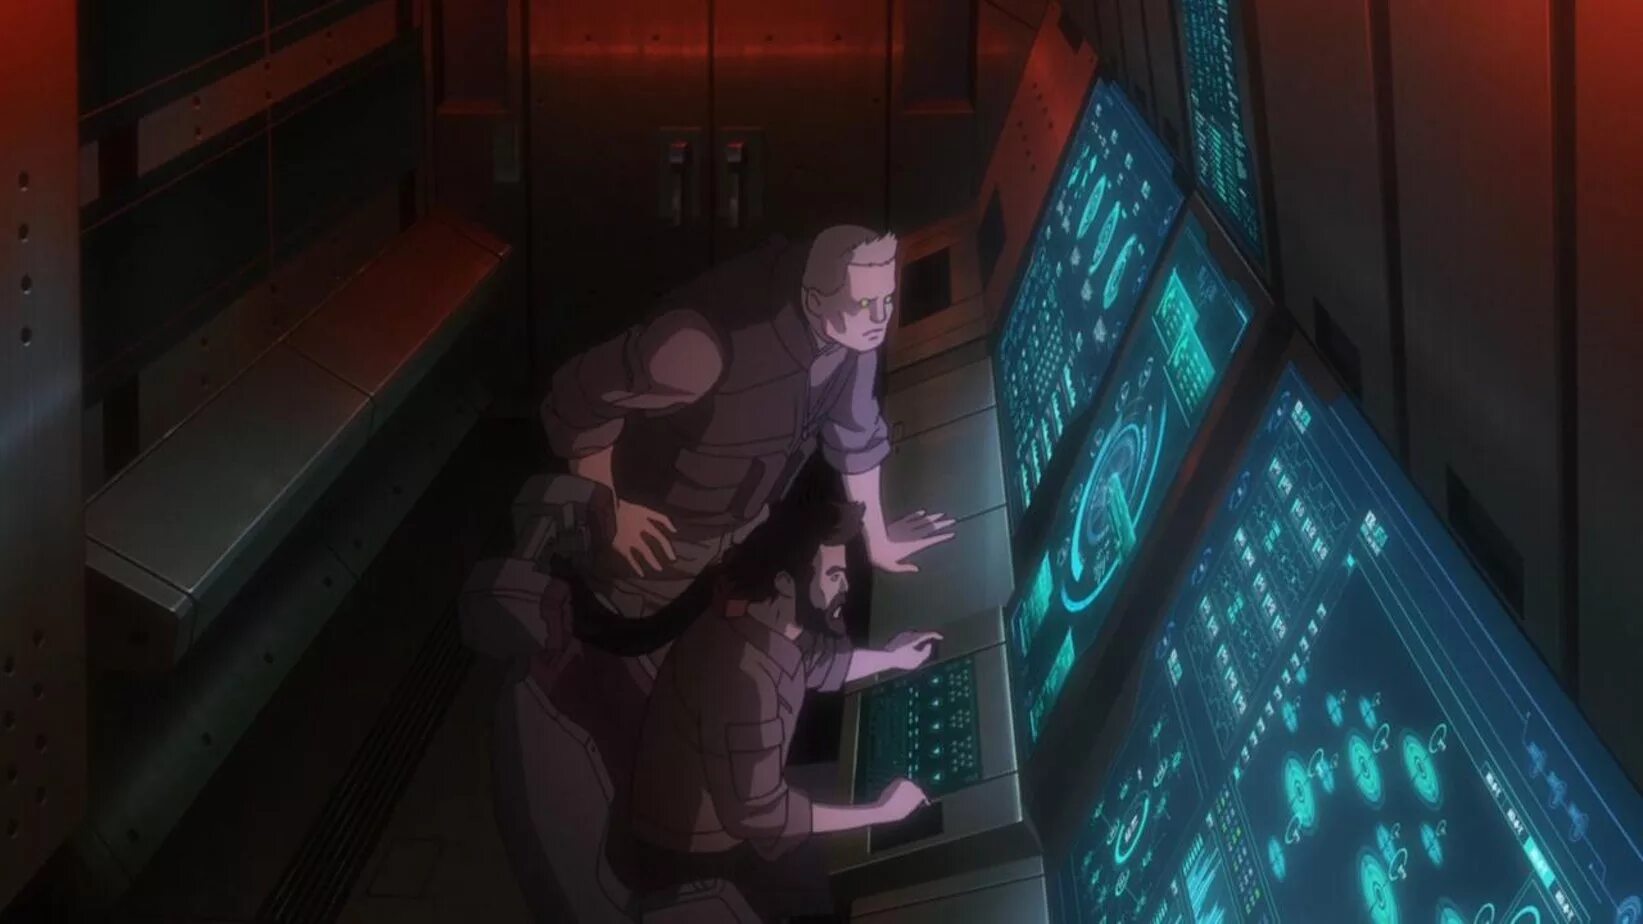 Ghost in the Shell Hologram. Ghost in the Shell 2 man Machine interface Decot. Future user